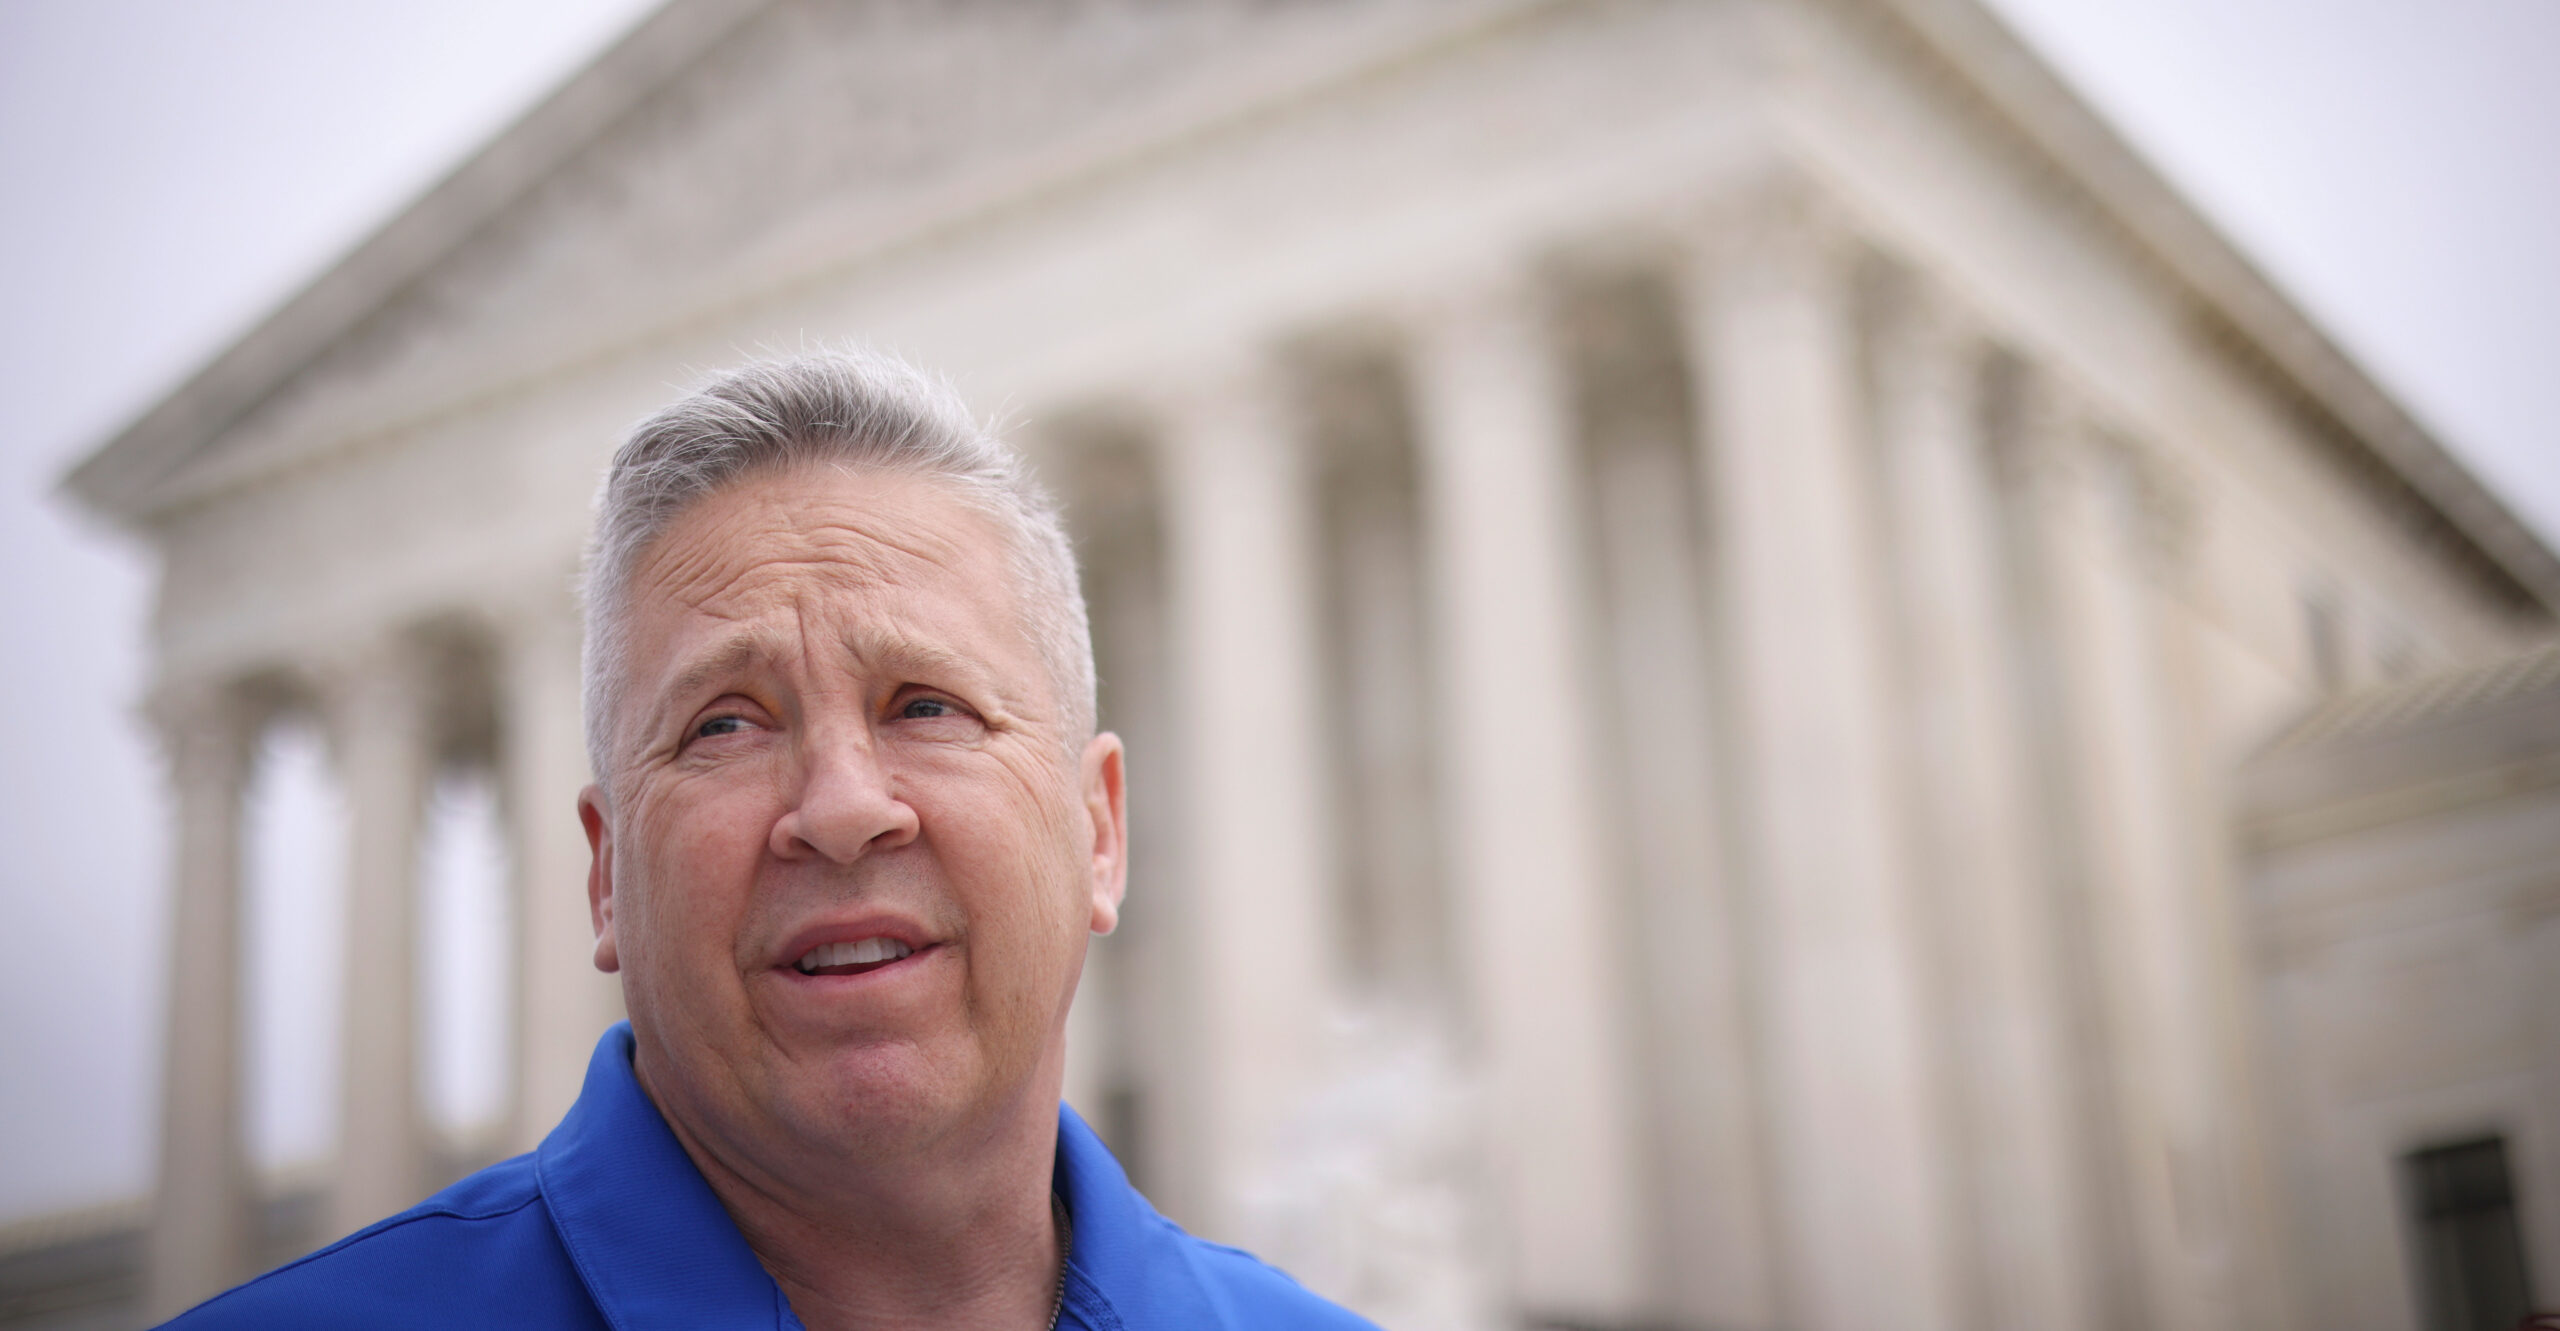 Praying Coach’s Case Gives Supreme Court Opportunity to Restore Teachers’ First Amendment Rights